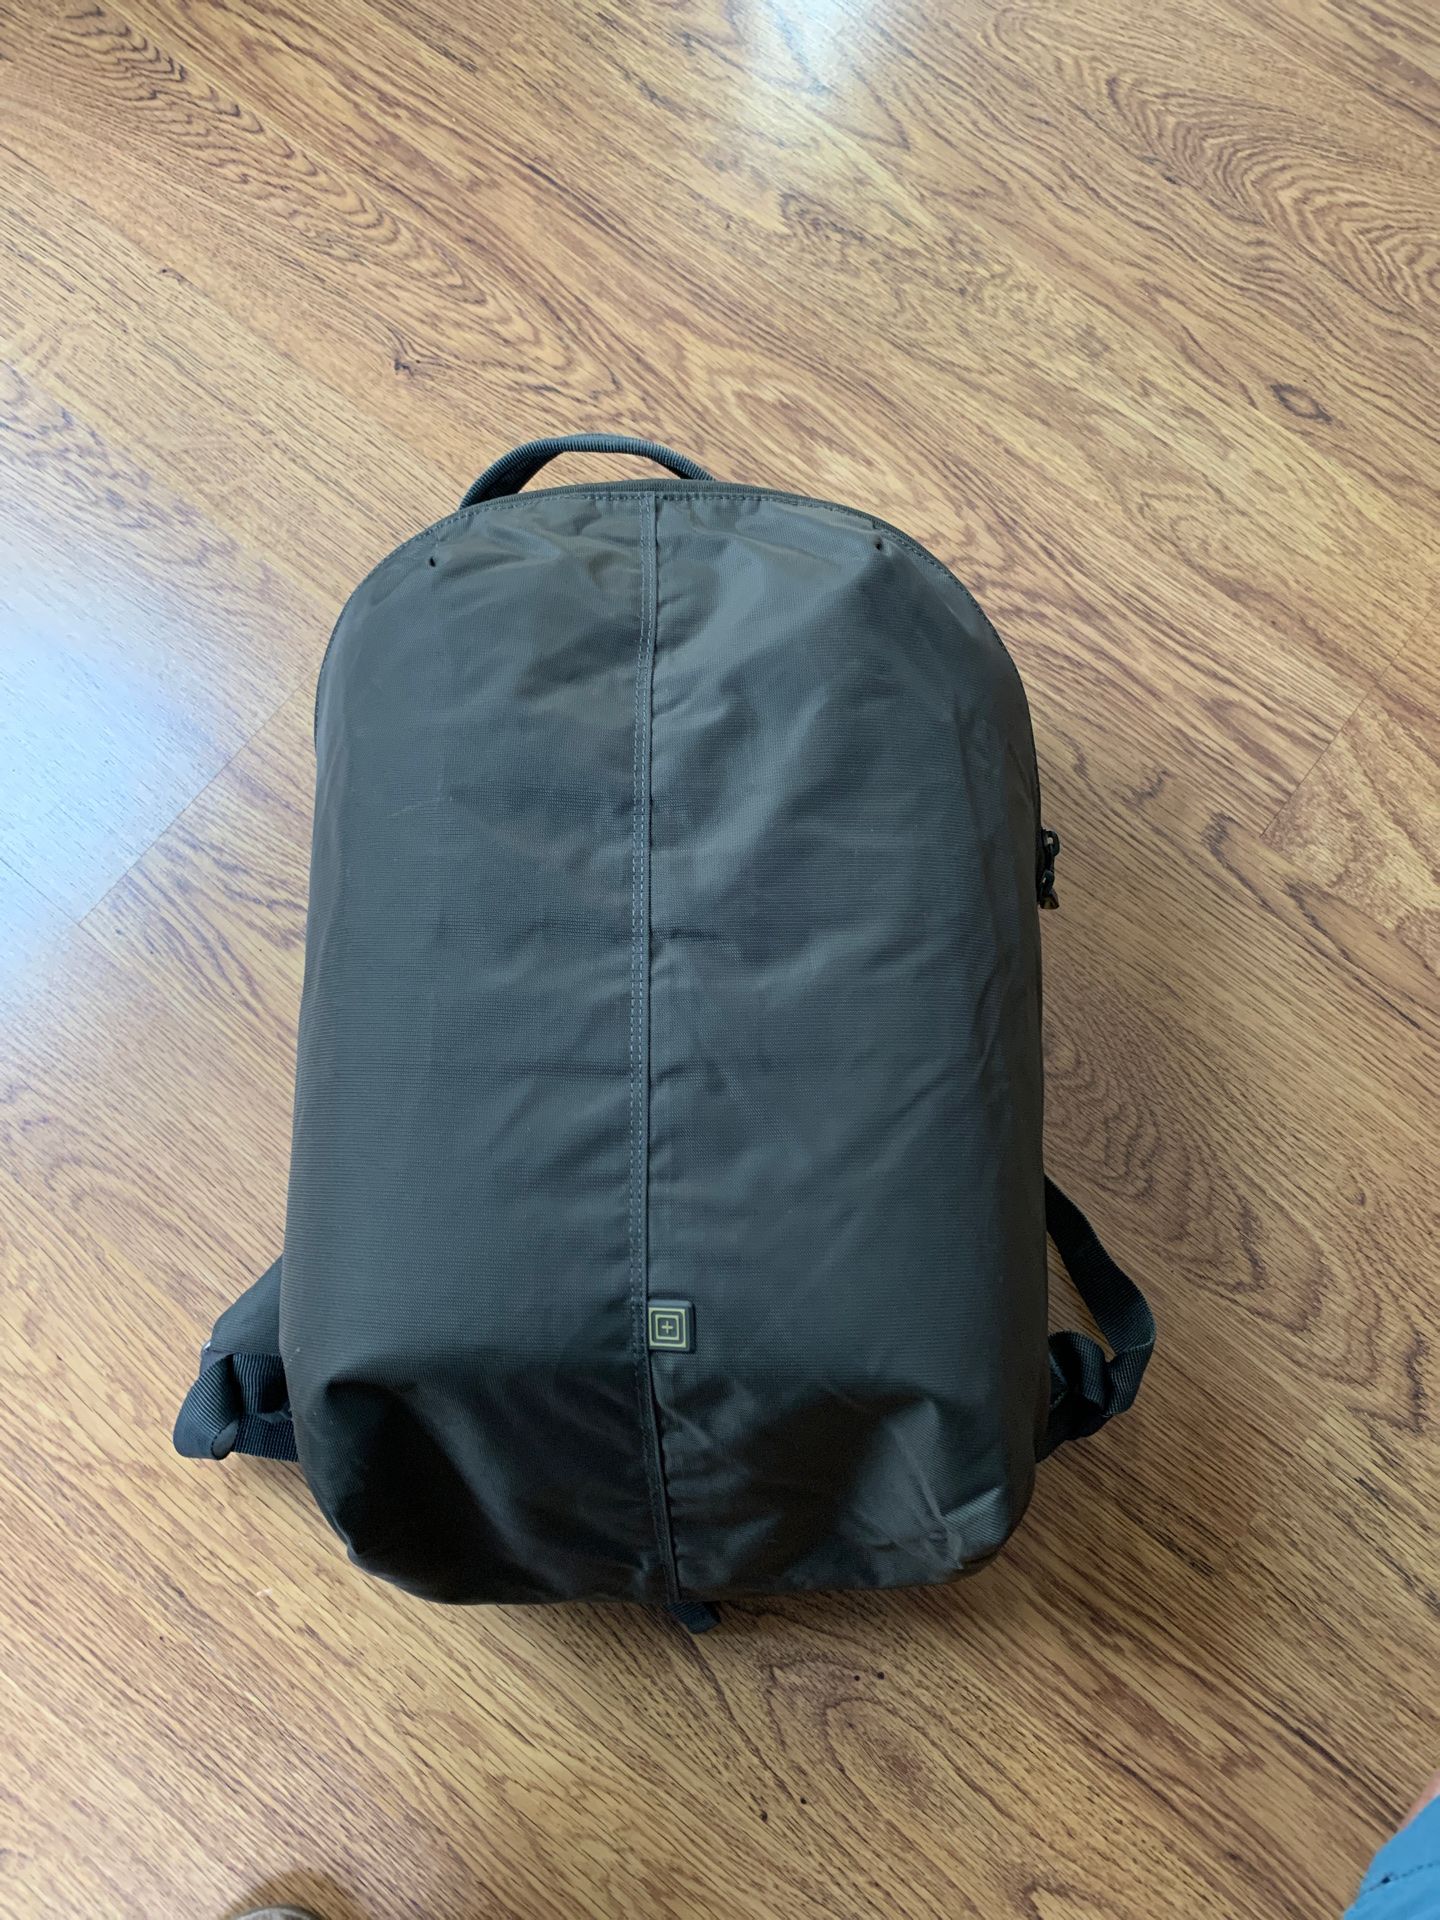 511 Tactical backpack